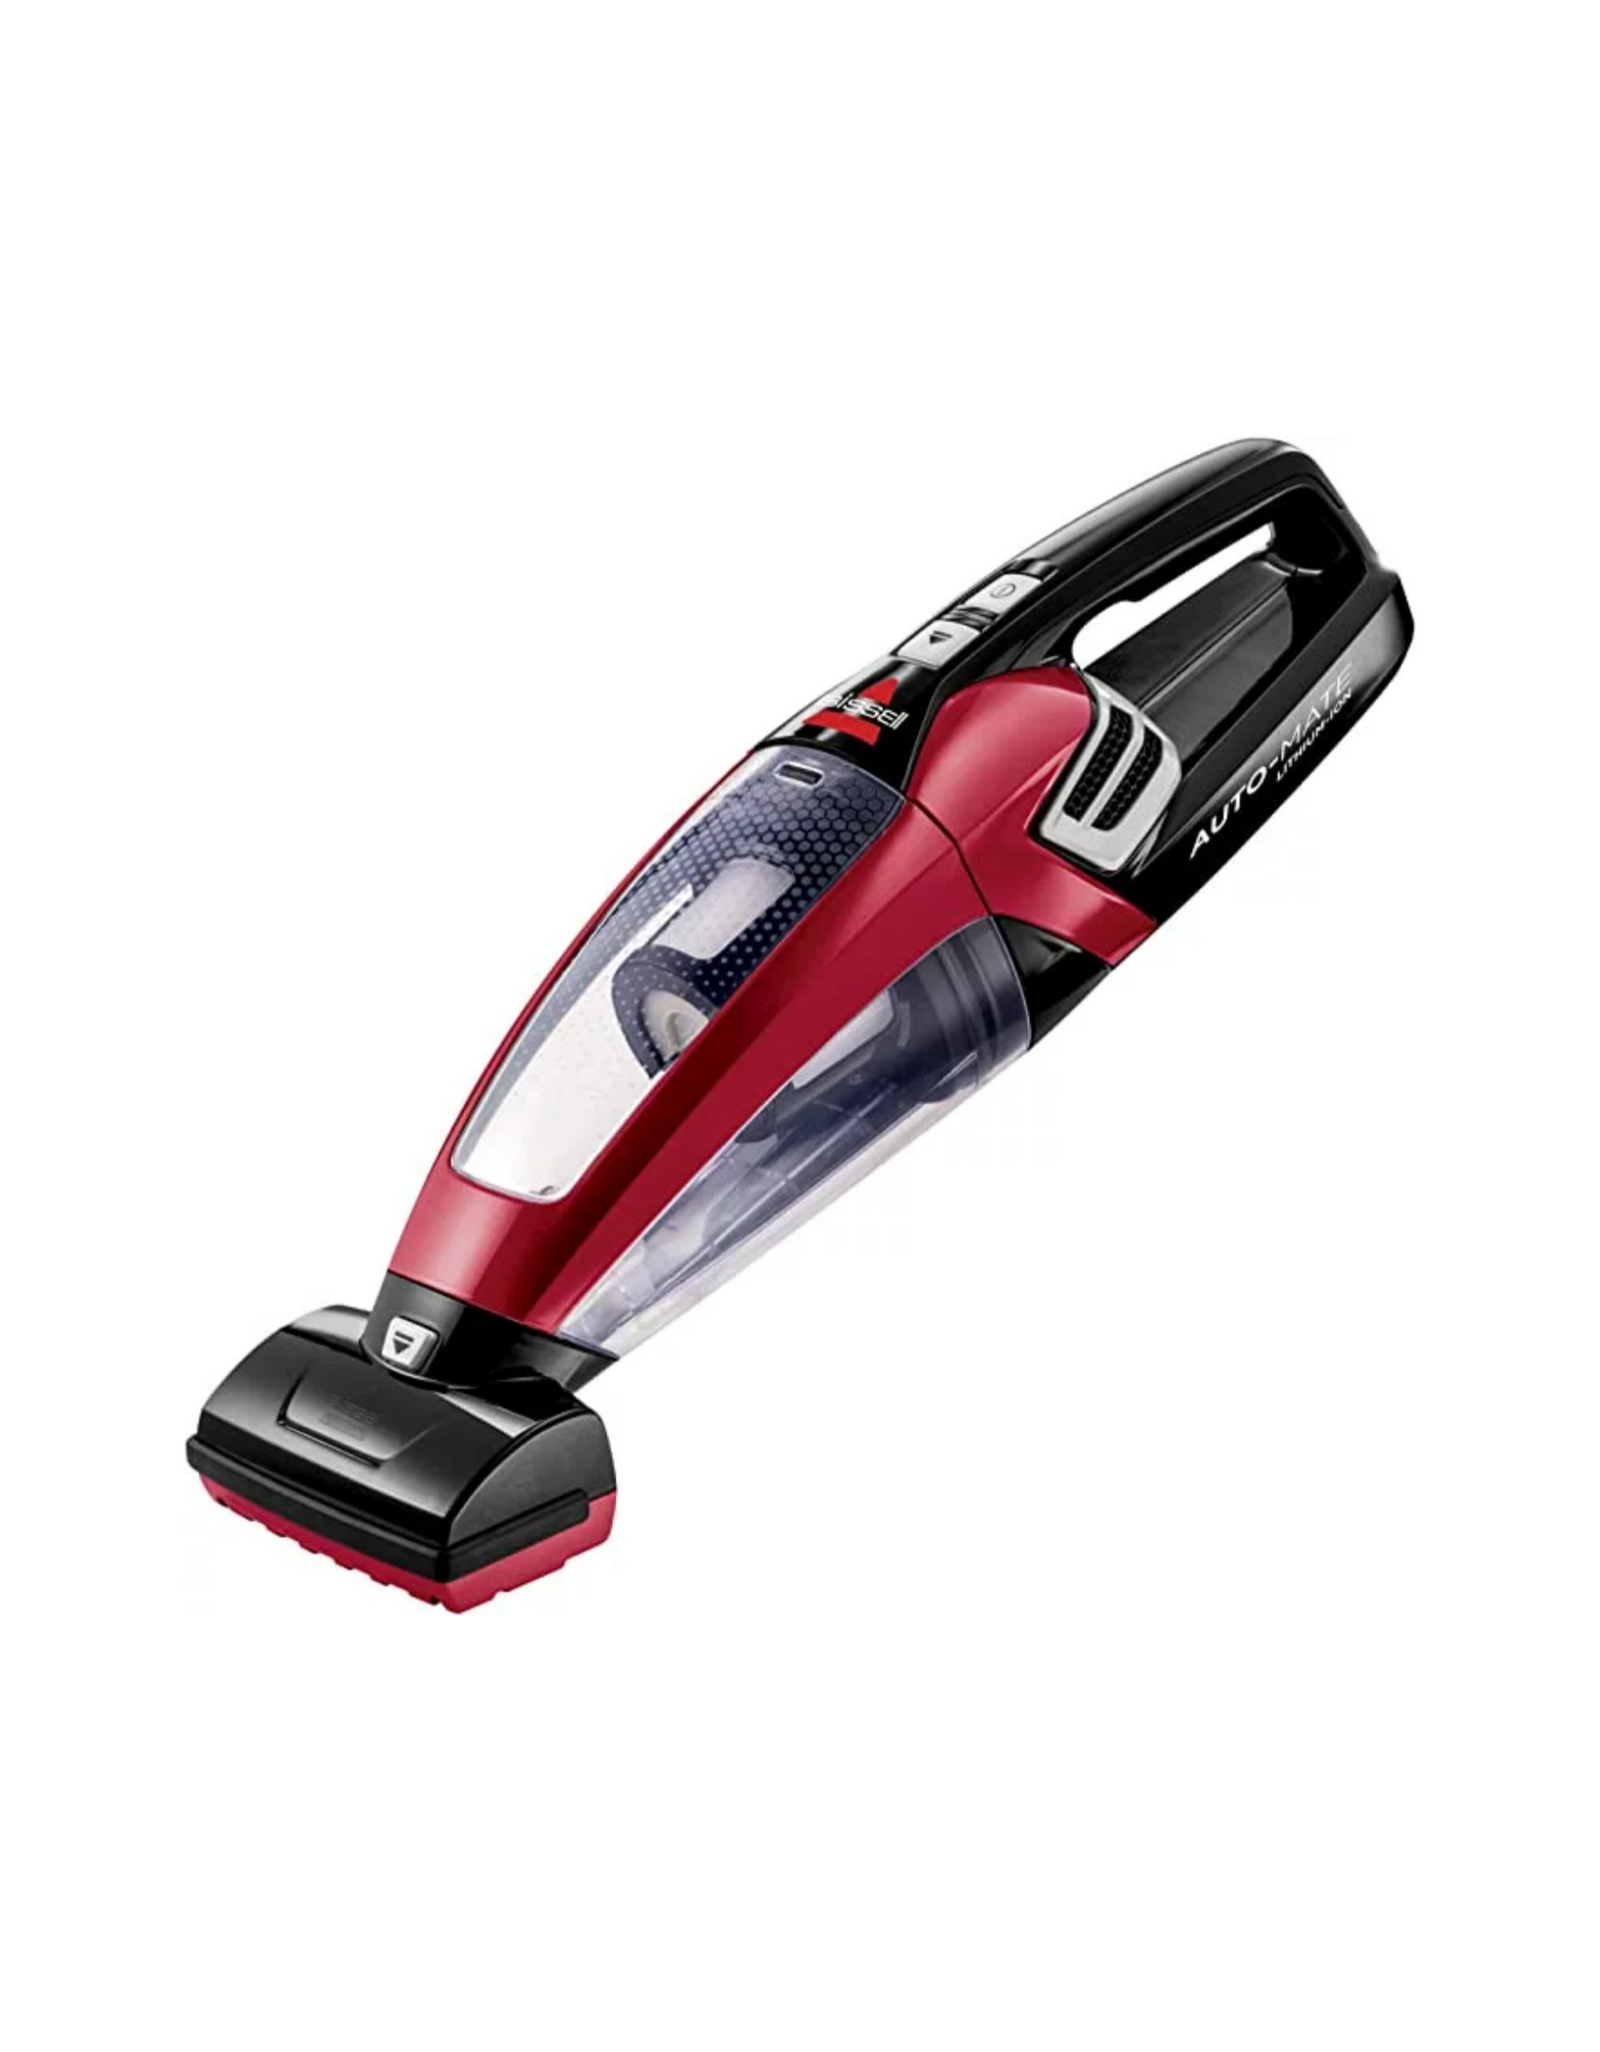 BISSELL AutoMate Lithium Ion Cordless Handheld car Vacuum, Red (2284W)